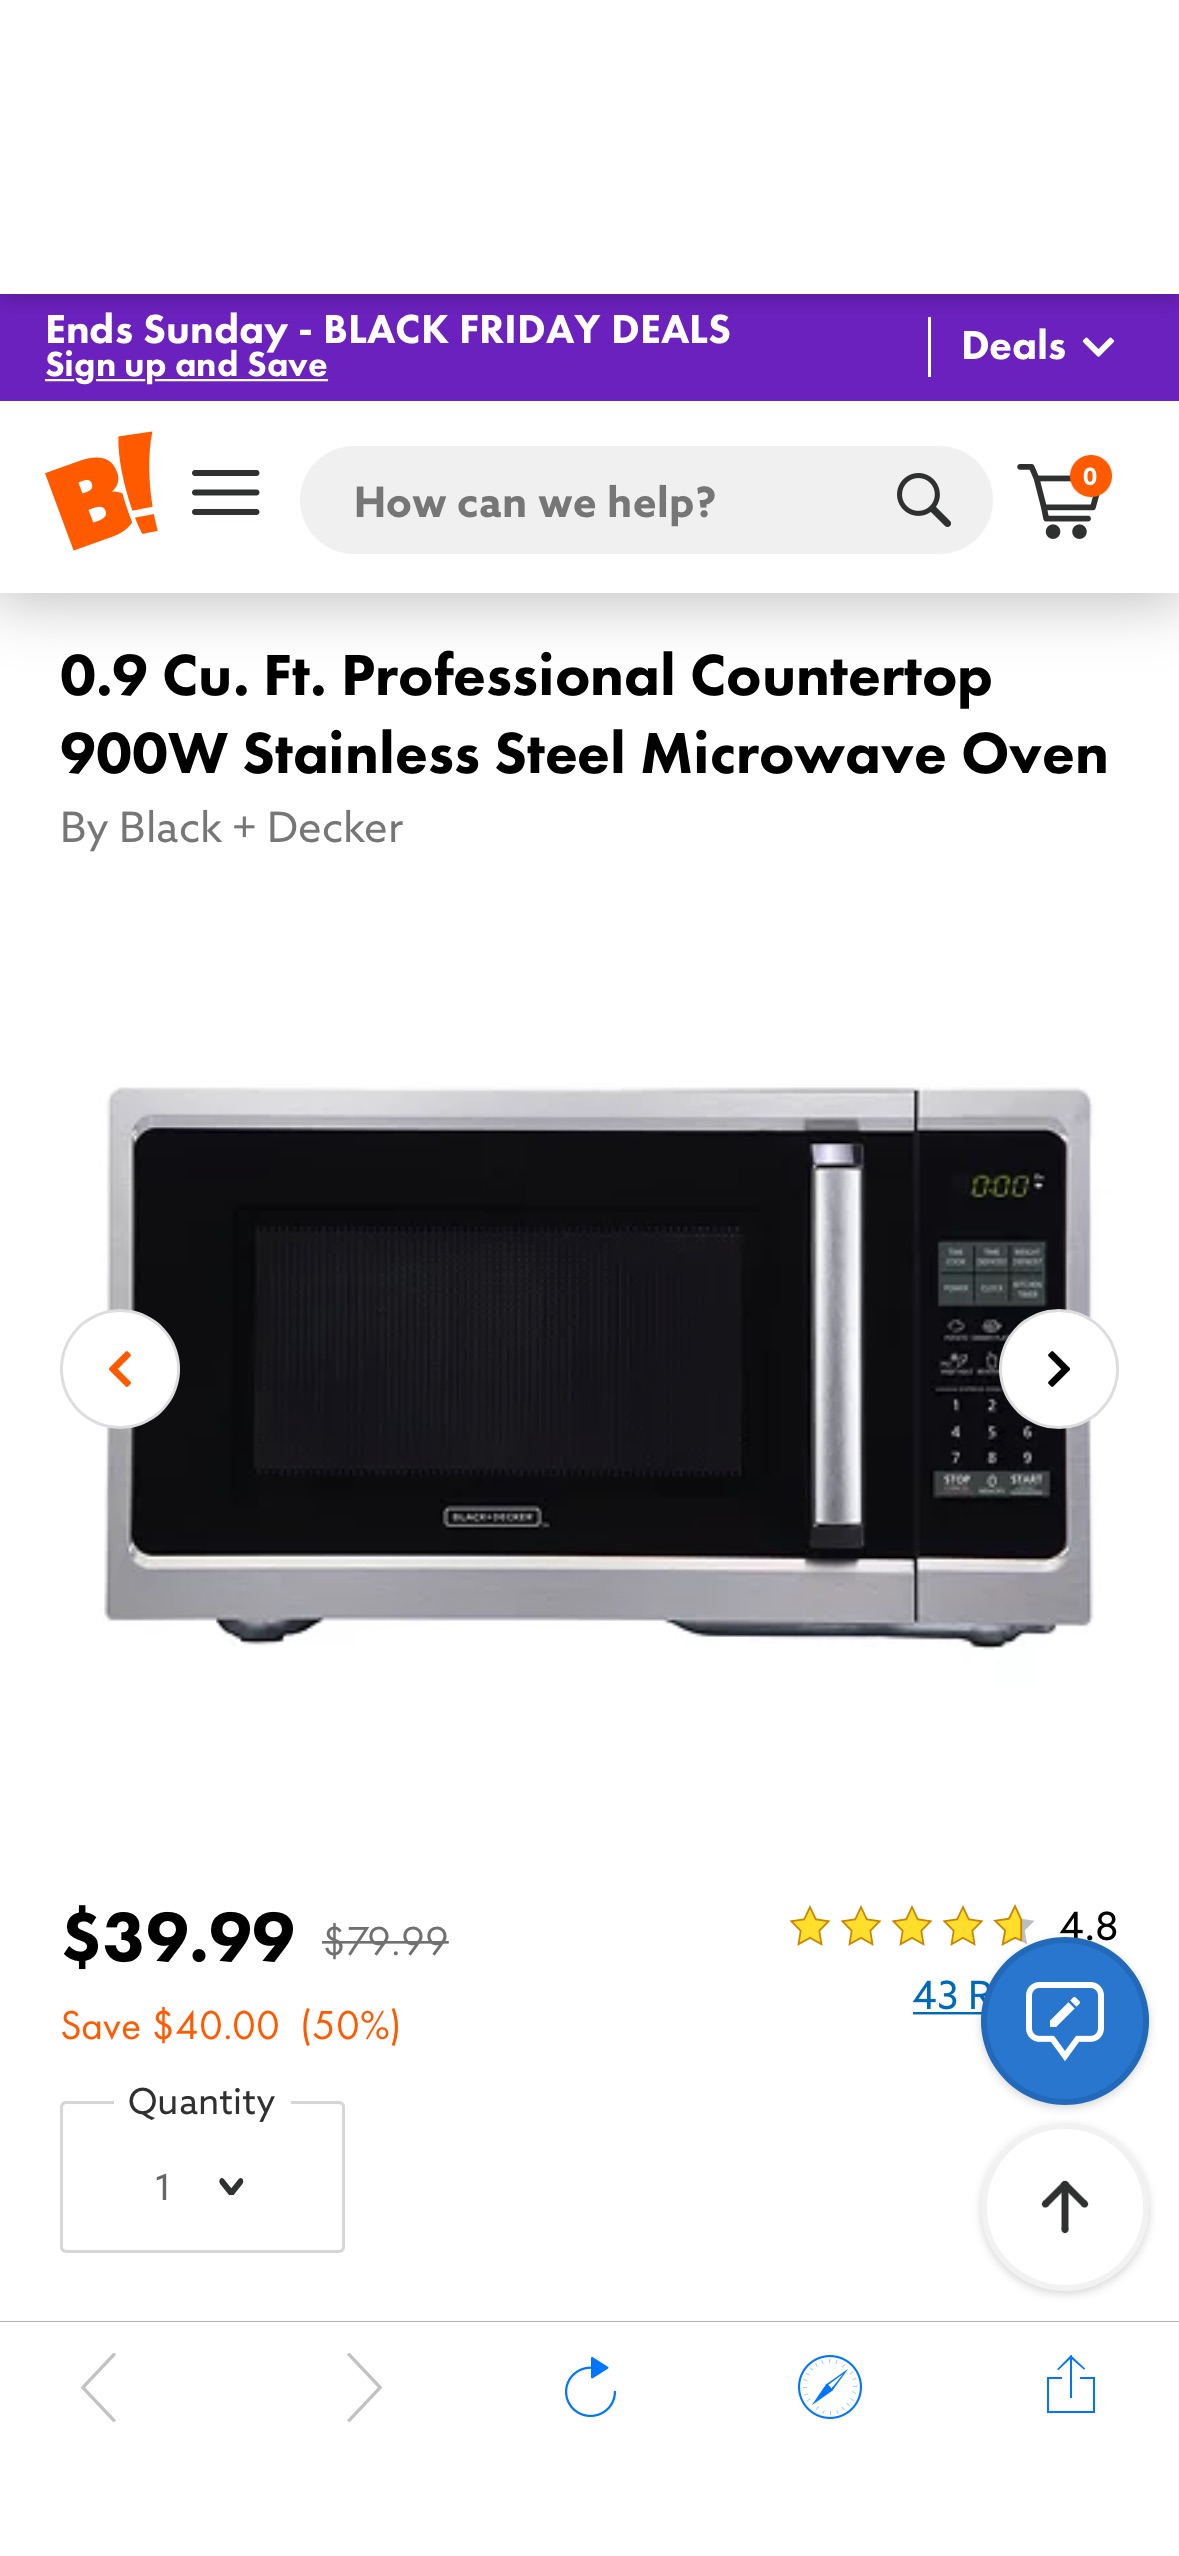 Black + Decker 0.9 Cu. Ft. Professional Countertop 900W Stainless Steel Microwave Oven | Big Lots